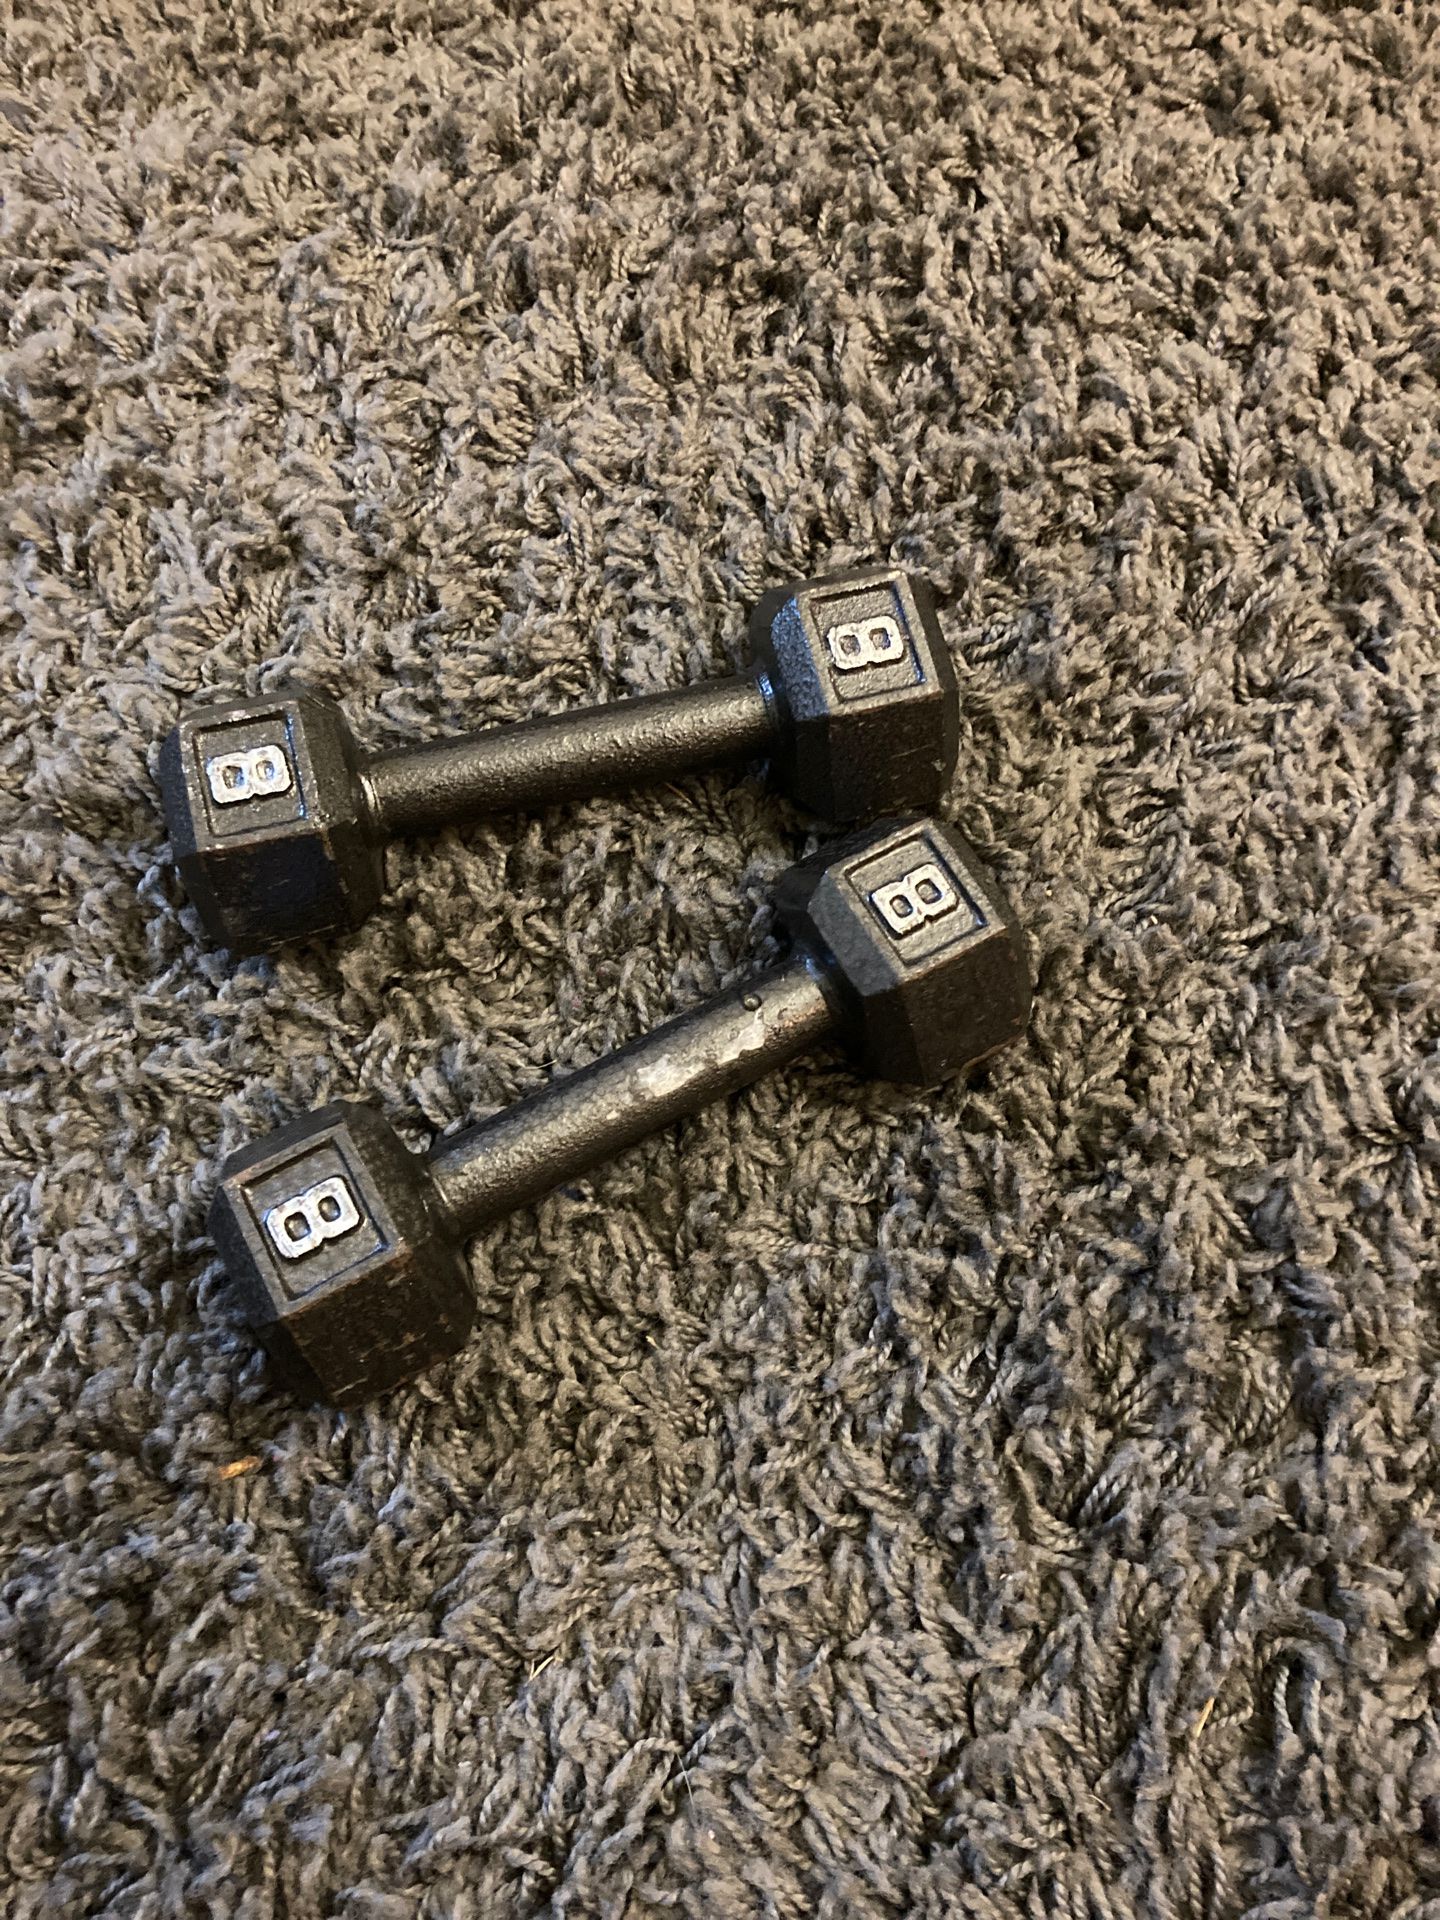 Weight s dumbbell s